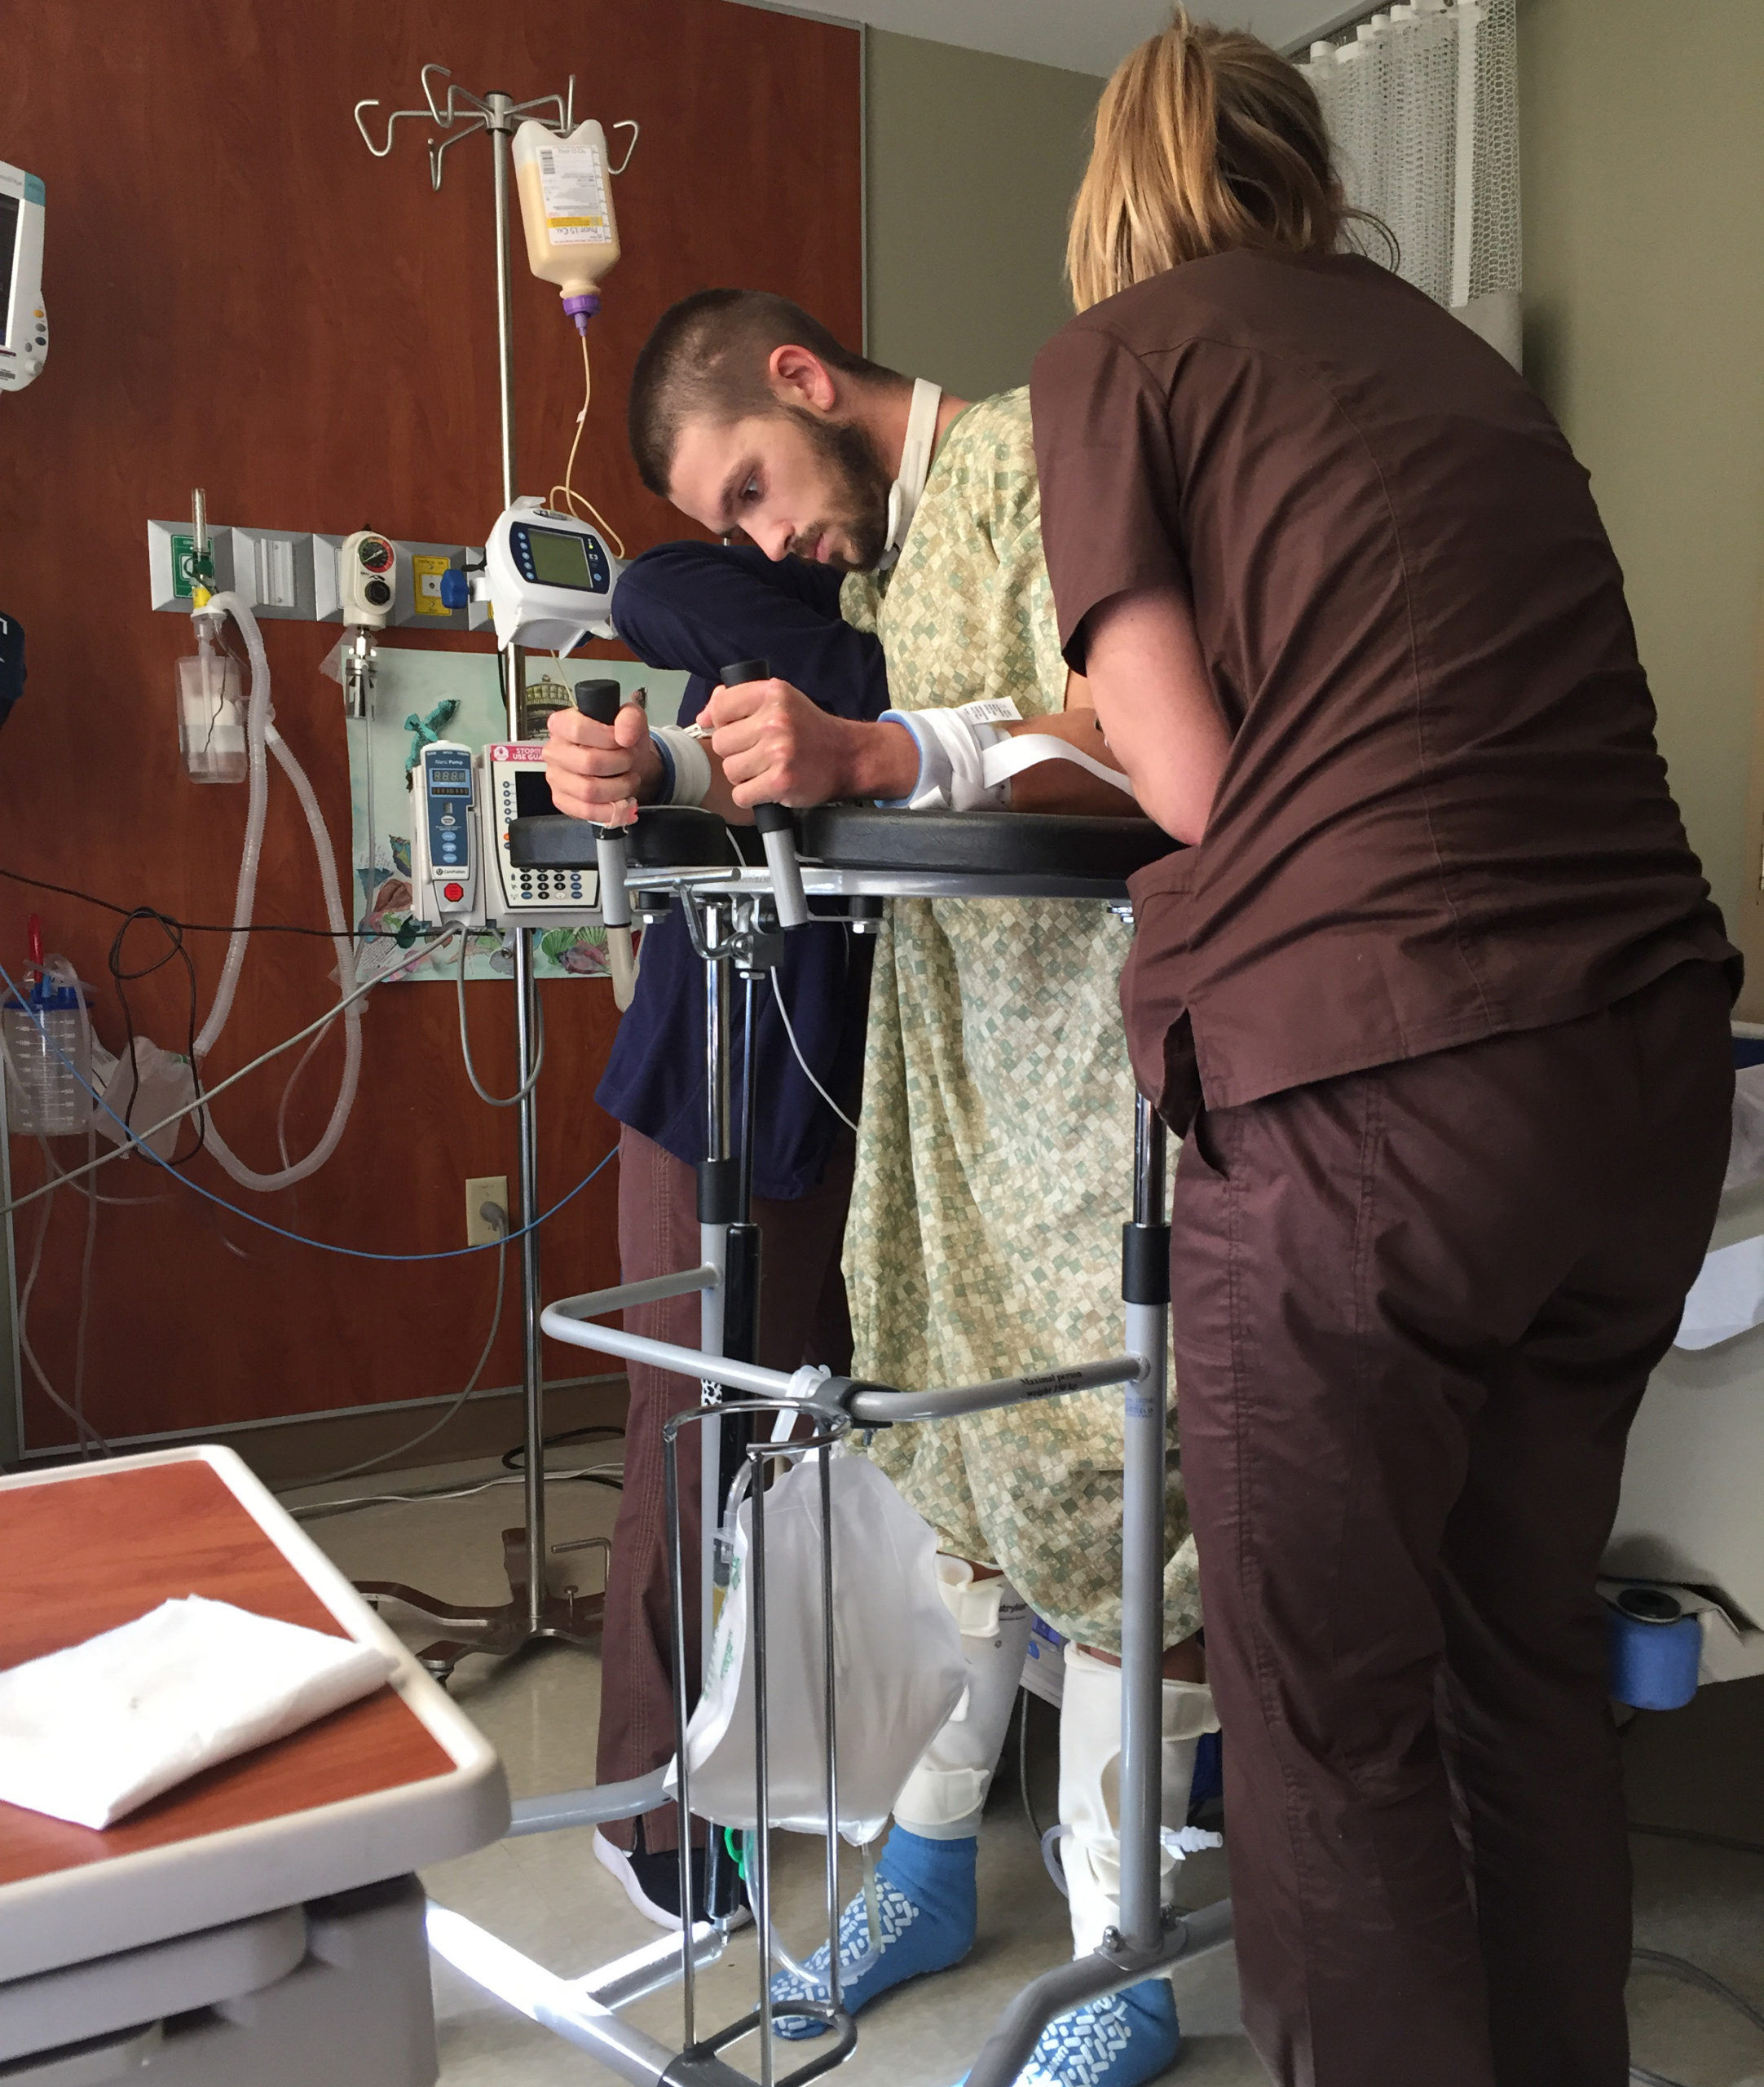 Male hospital patient holding onto stand as nurses help him stand up